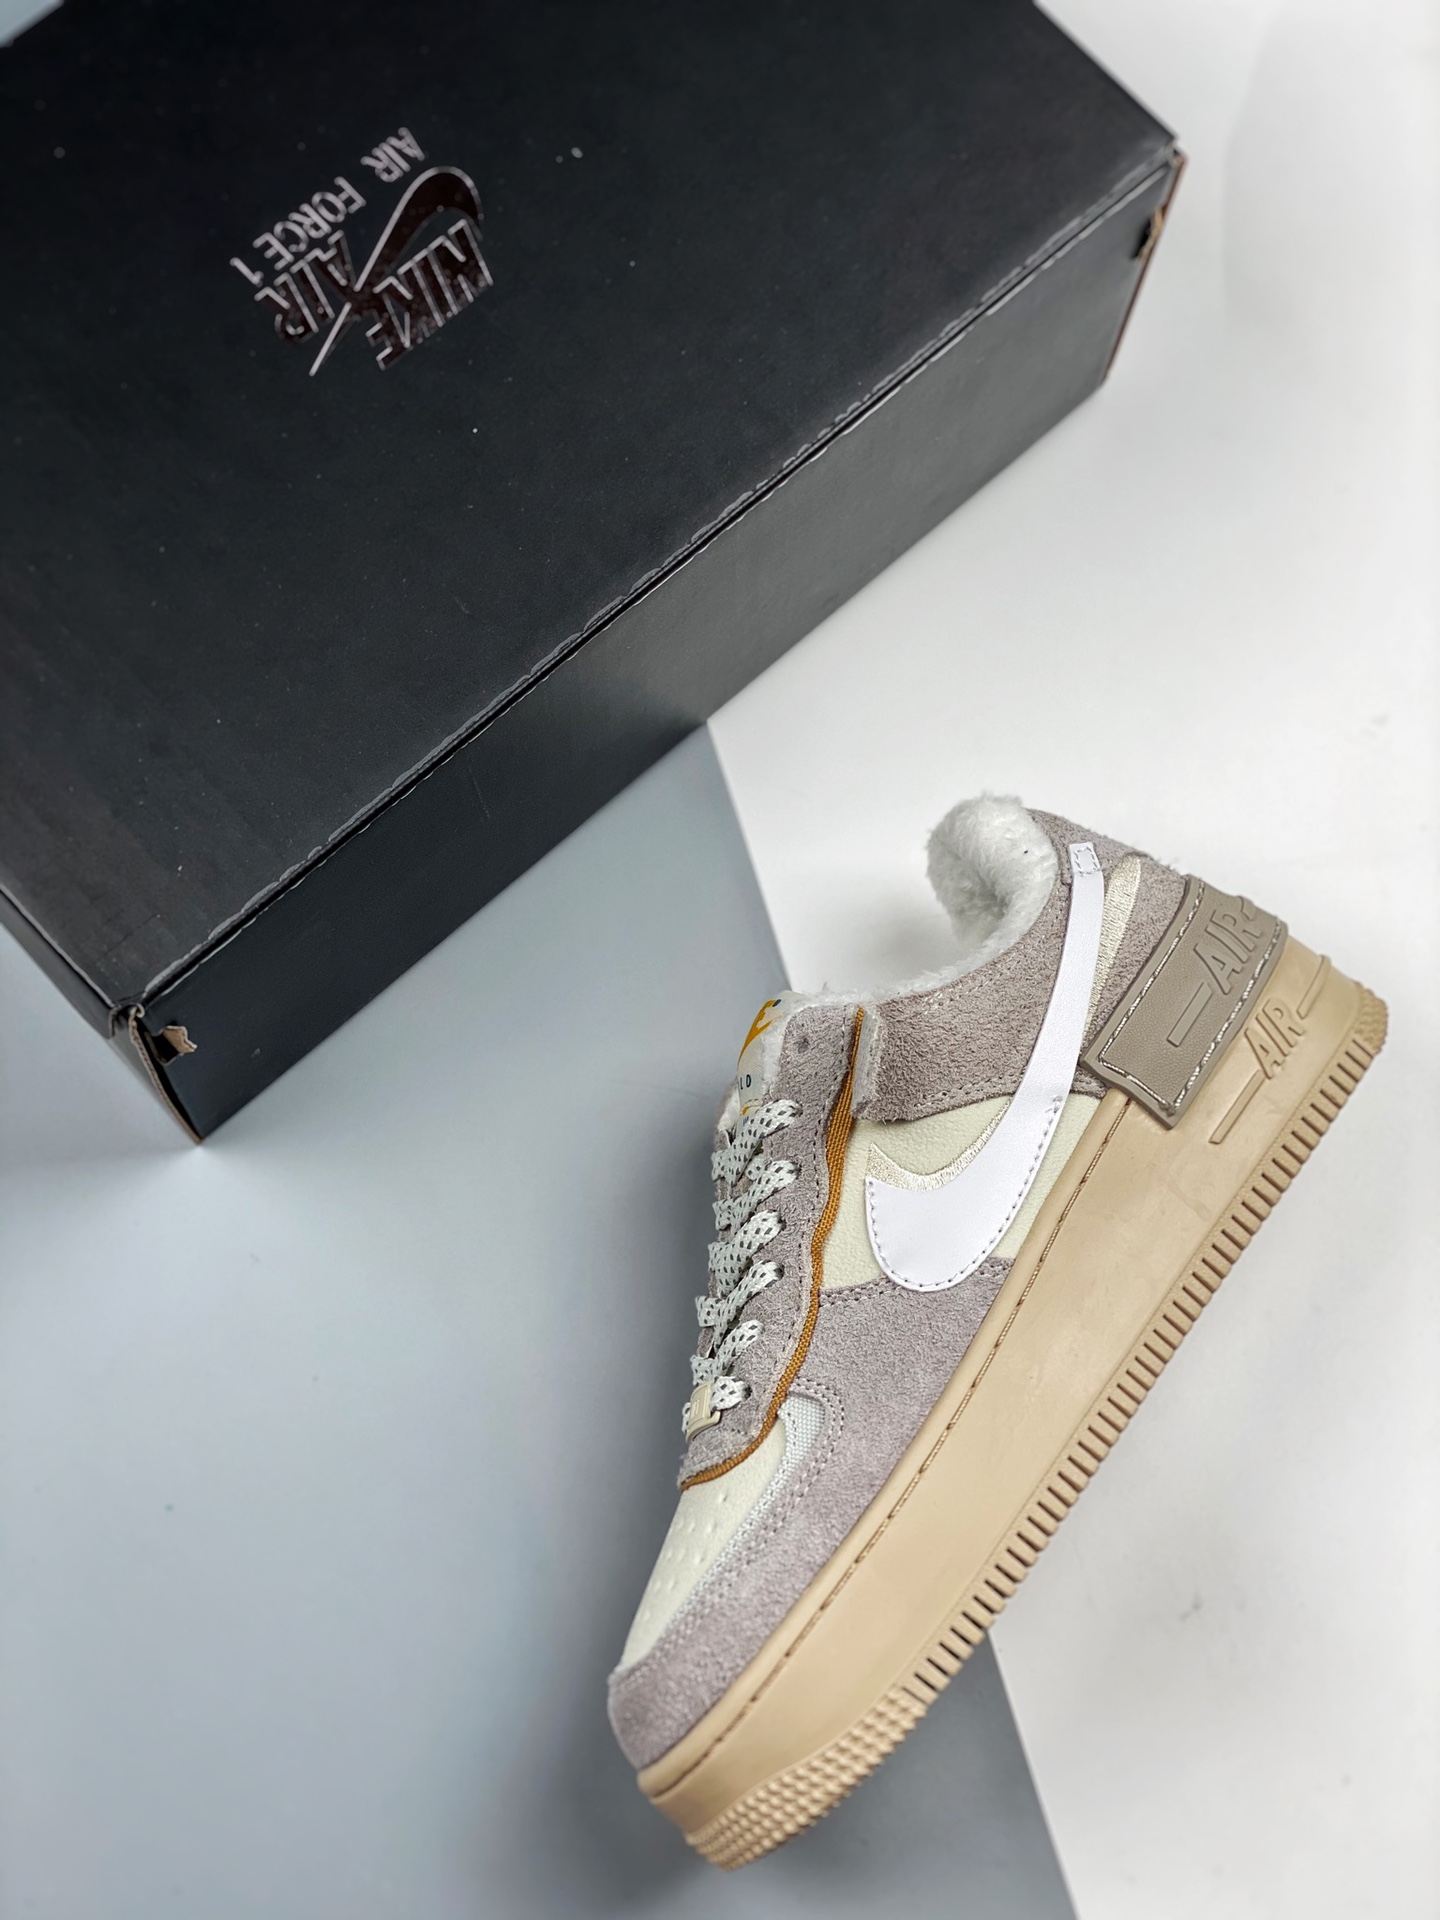 Nike Air Force 1 Shadow “Wild” DC5270-016 For Sale – Sneaker Hello